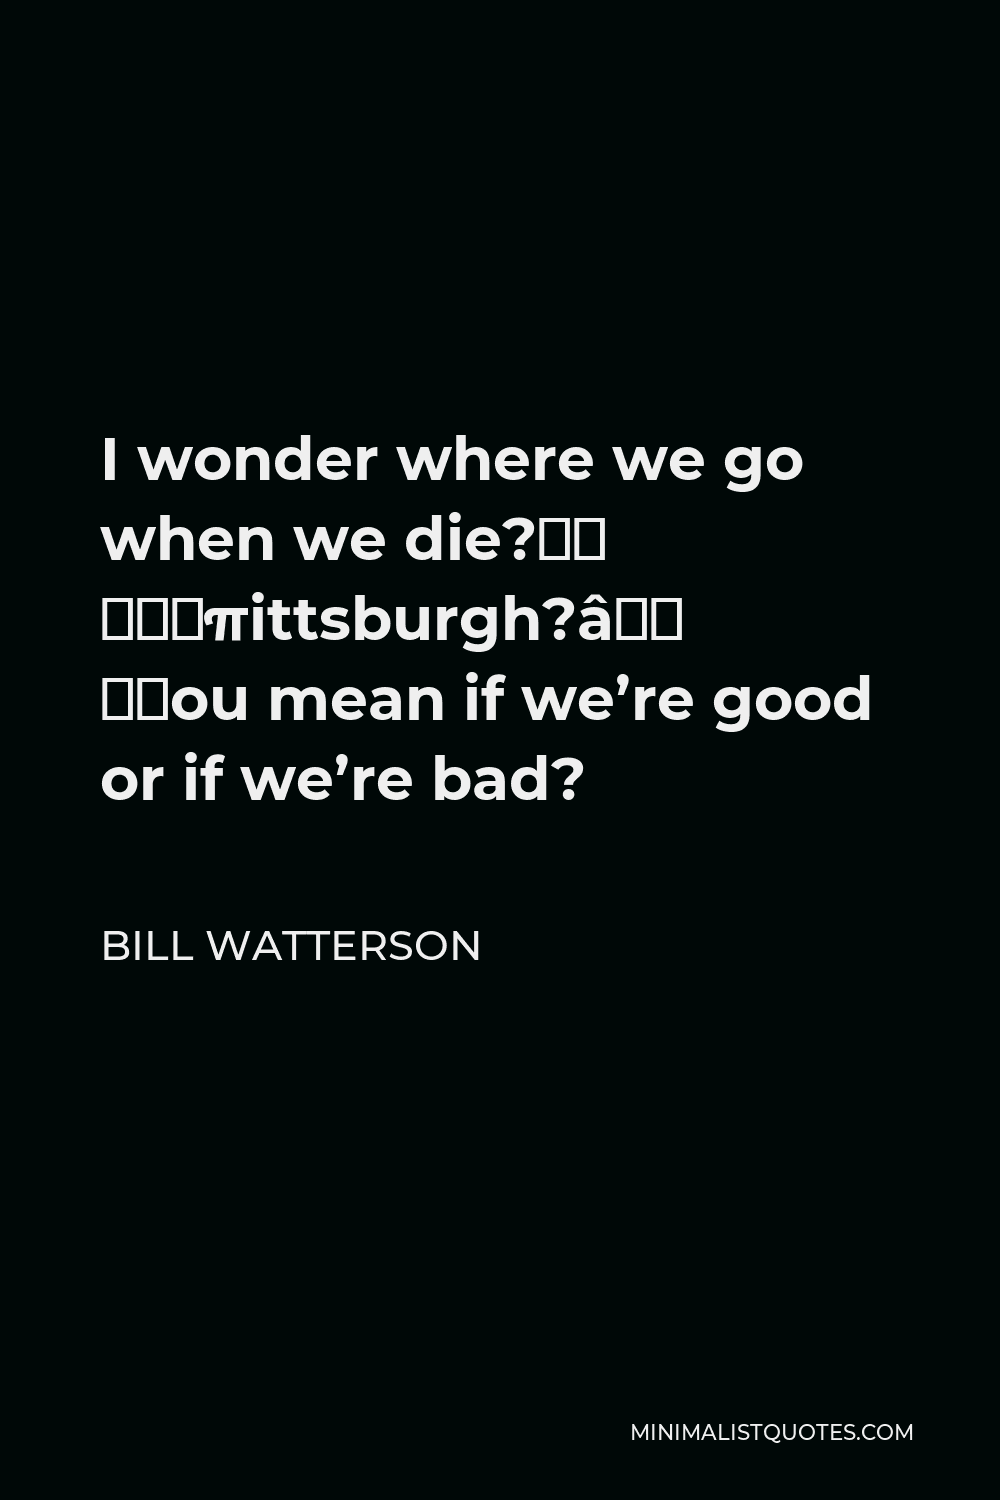 Bill Watterson Quote - I wonder where we go when we die?” “…Pittsburgh?” “You mean if we’re good or if we’re bad?